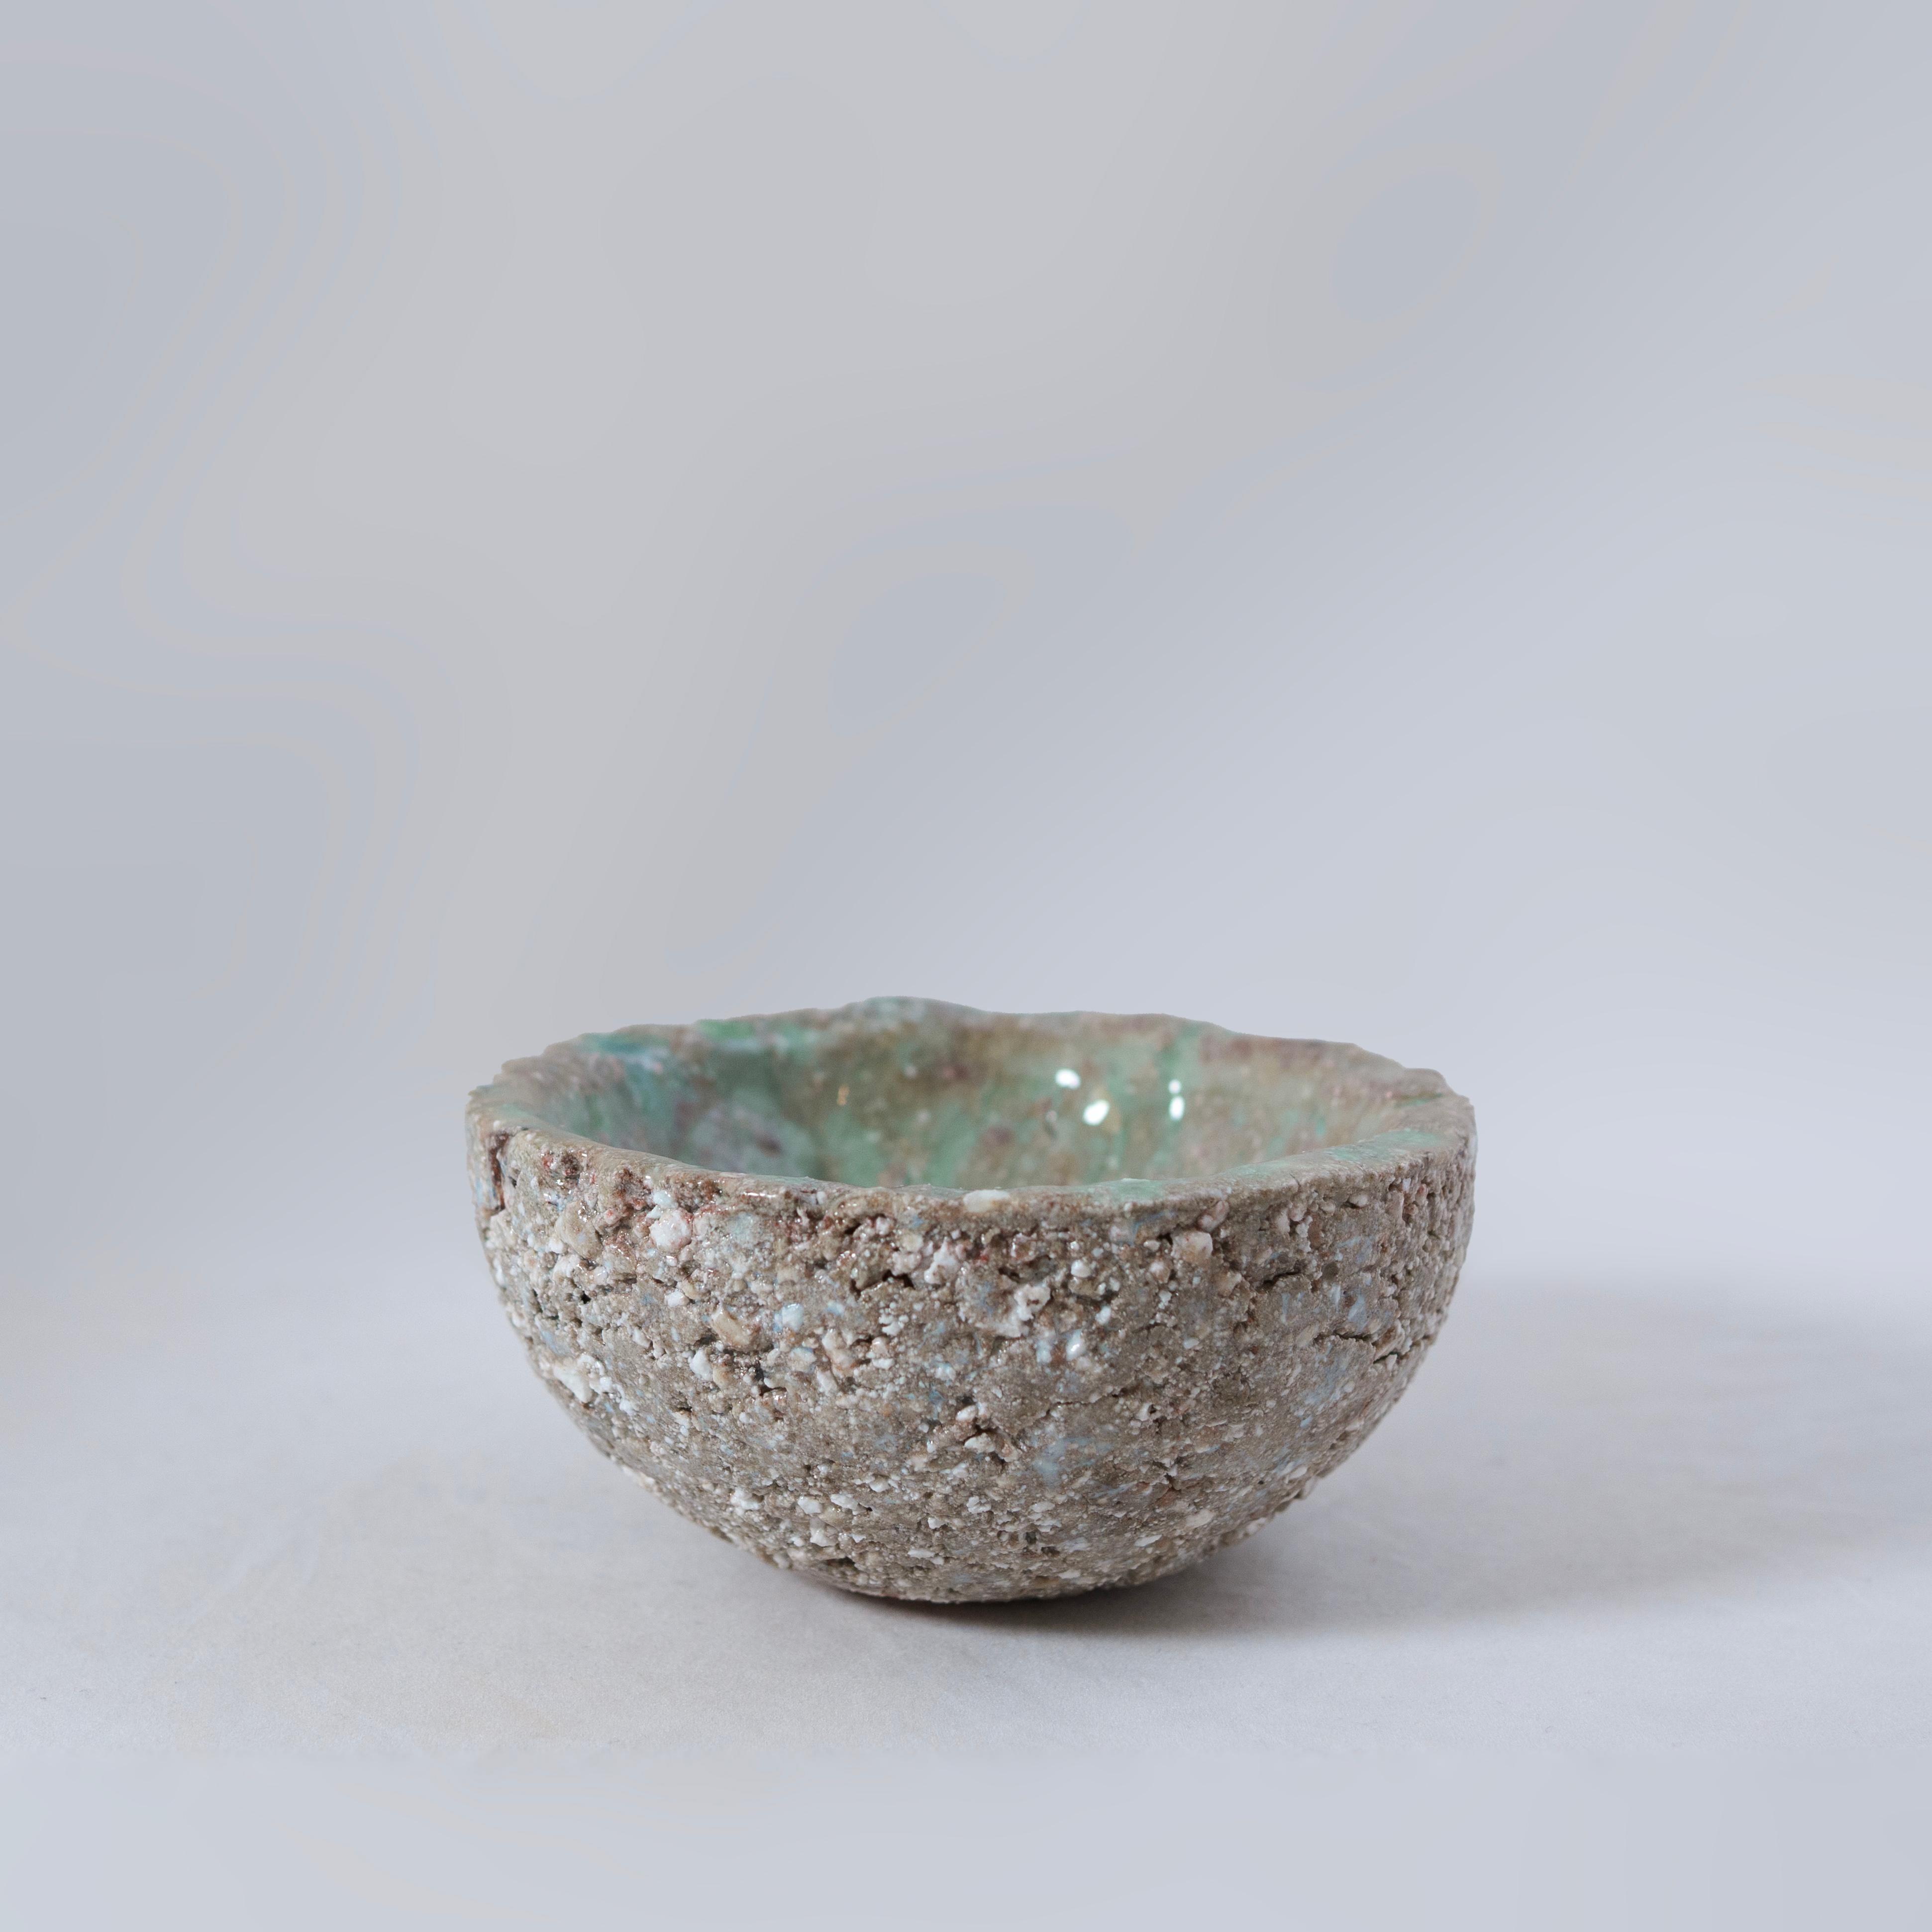 Bowl made with local clay from Shigaraki, one of the six ancient kiln sites in Japan. Shigaraki is known for the special qualities of their clay. This sandy clay comes from the bed of Lake Biwa which is over 4 million years old. Made with